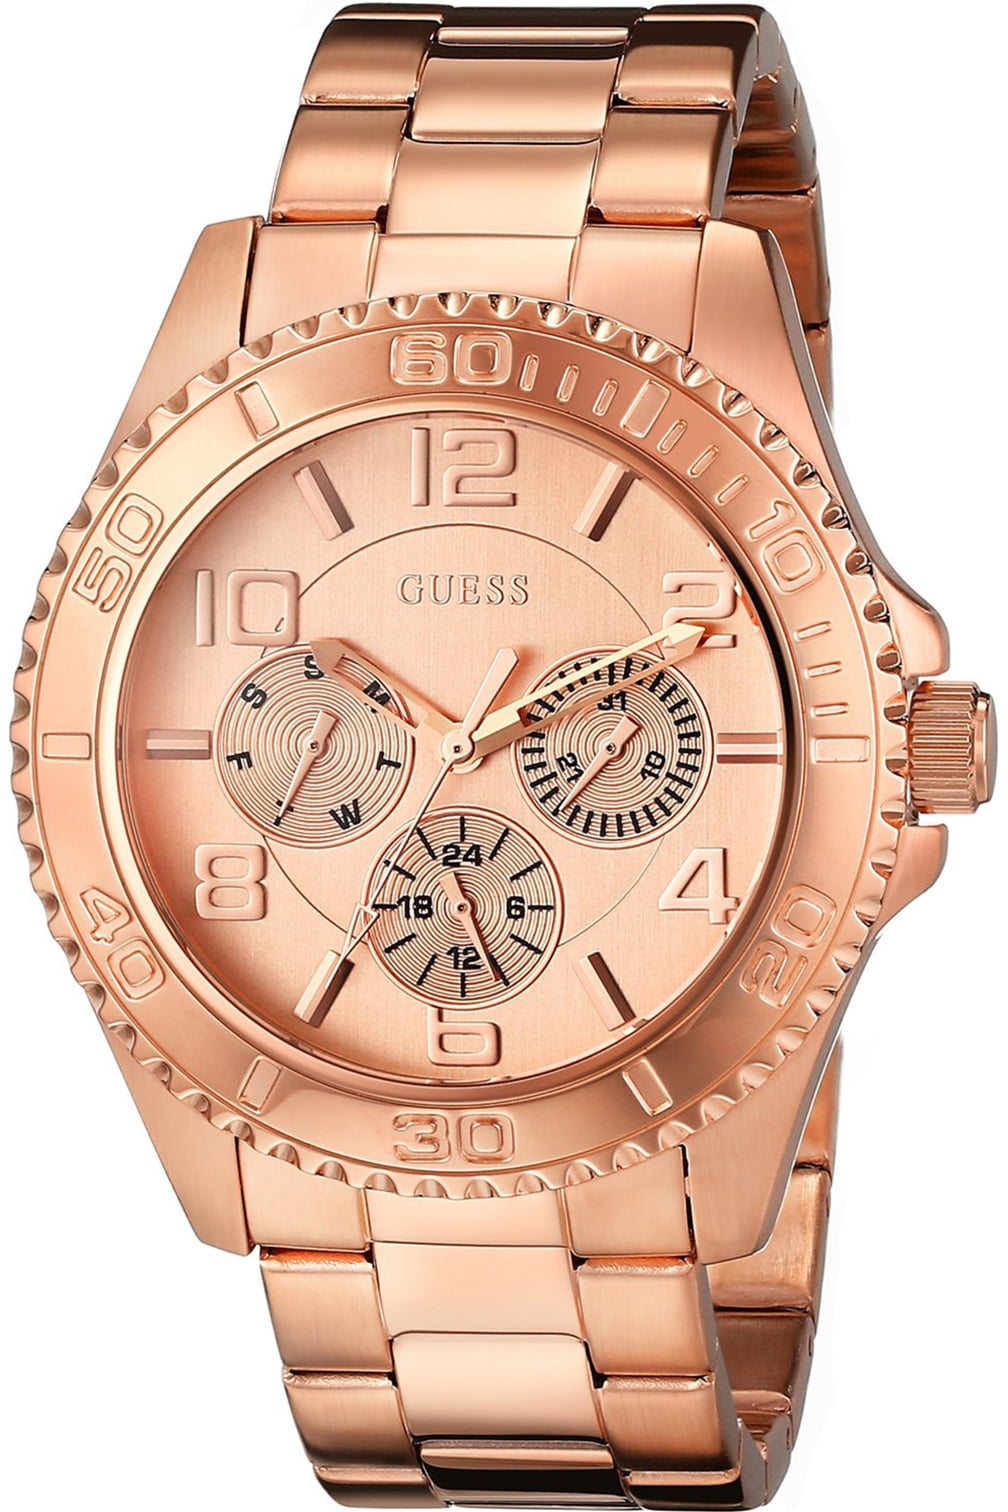 GUESS Womens Watches in Watches   Walmart.com